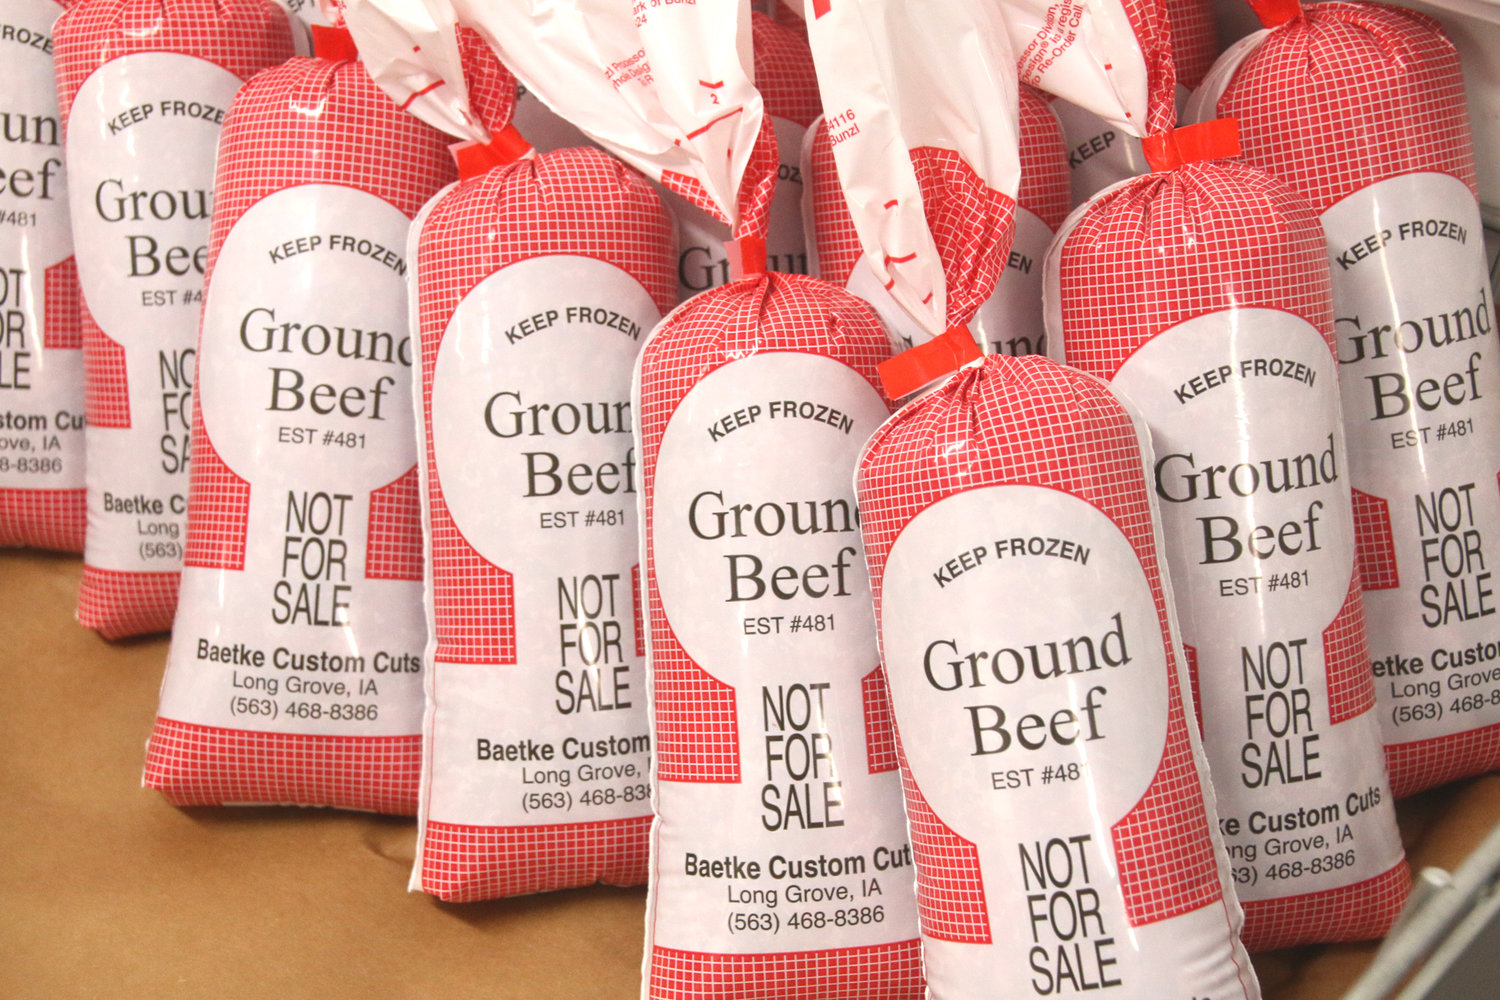 Ground Beef Meat Bags - Bunzl Processor Division